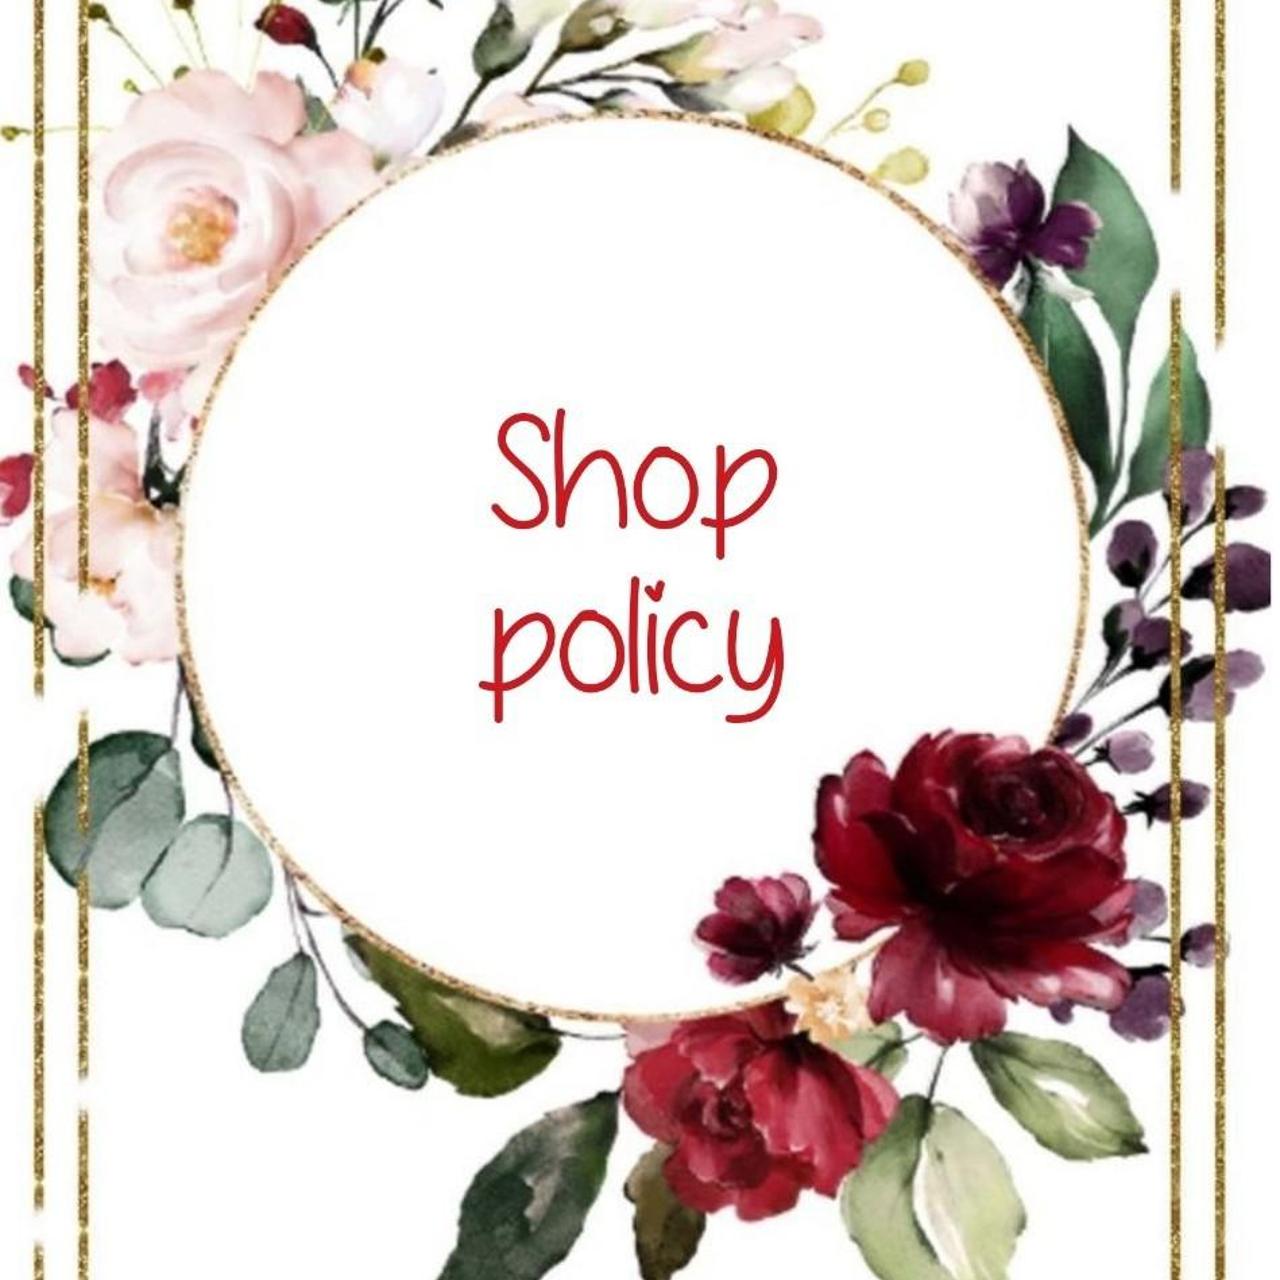 Product Image 1 - SHOP POLICY*

No exchanges
No refunds/returns with